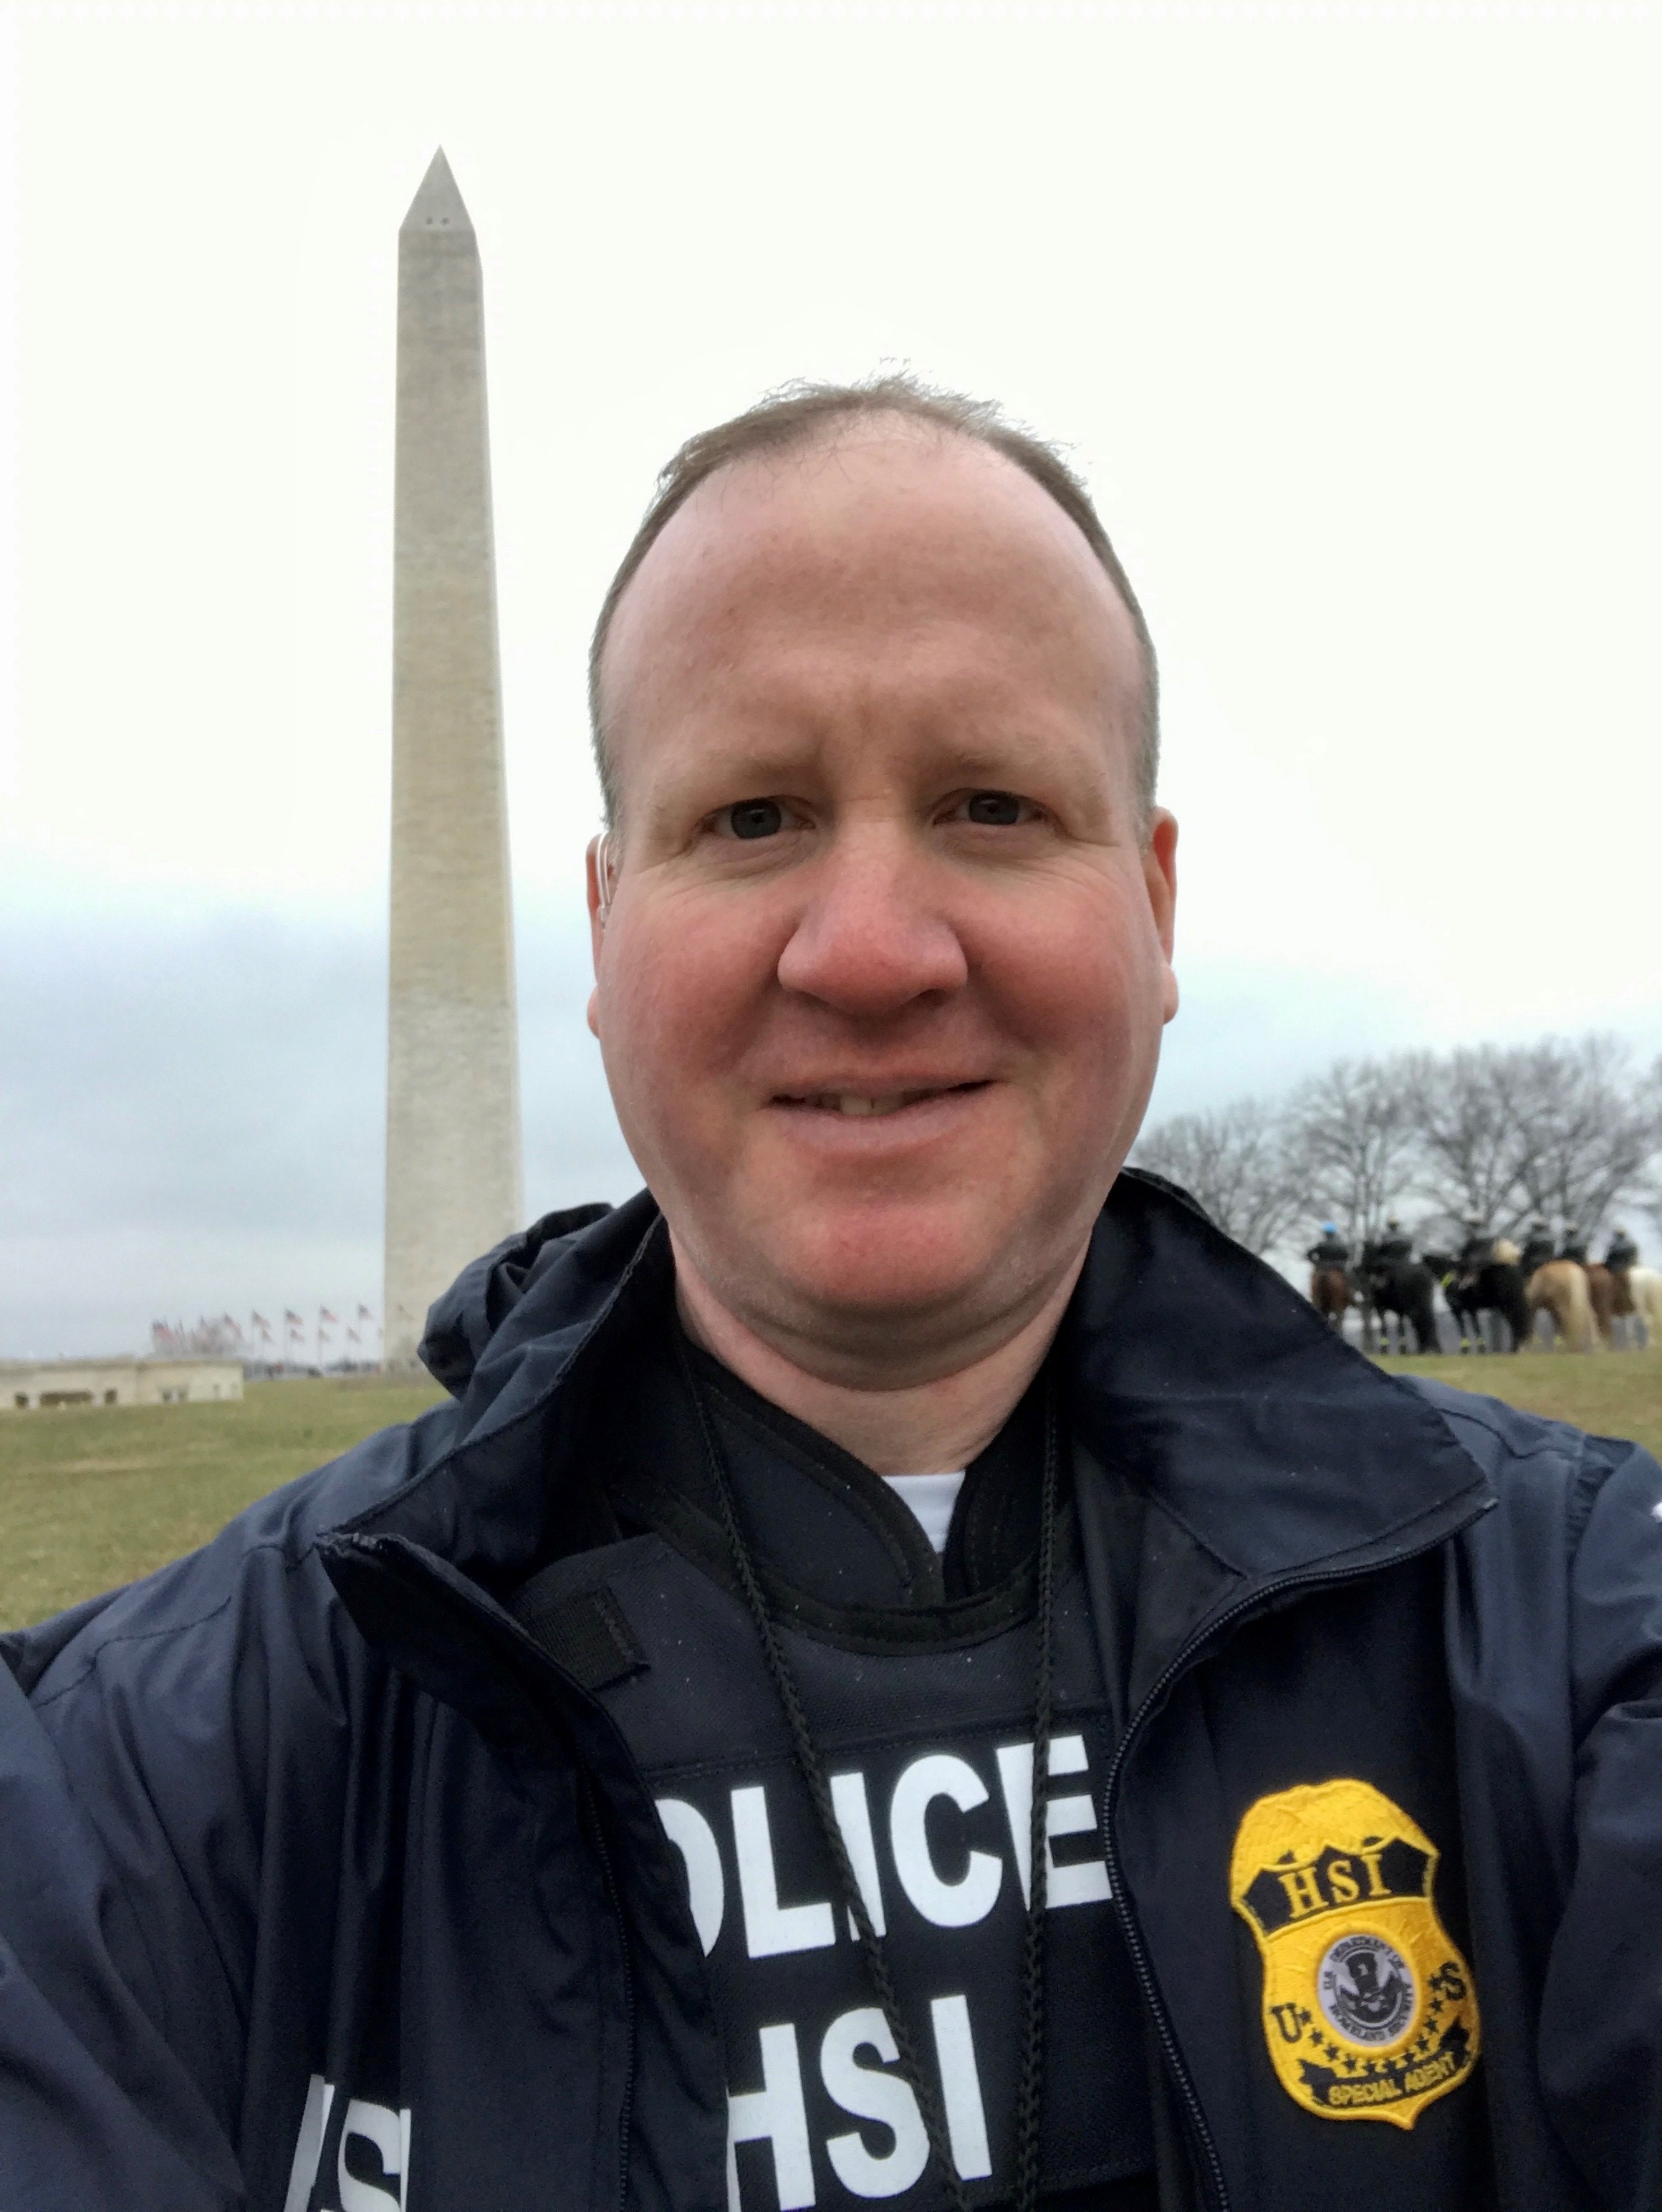 Special Agent Peter Christopher Egan | United States Department of Homeland Security - Immigration and Customs Enforcement - Office of Investigations, U.S. Government